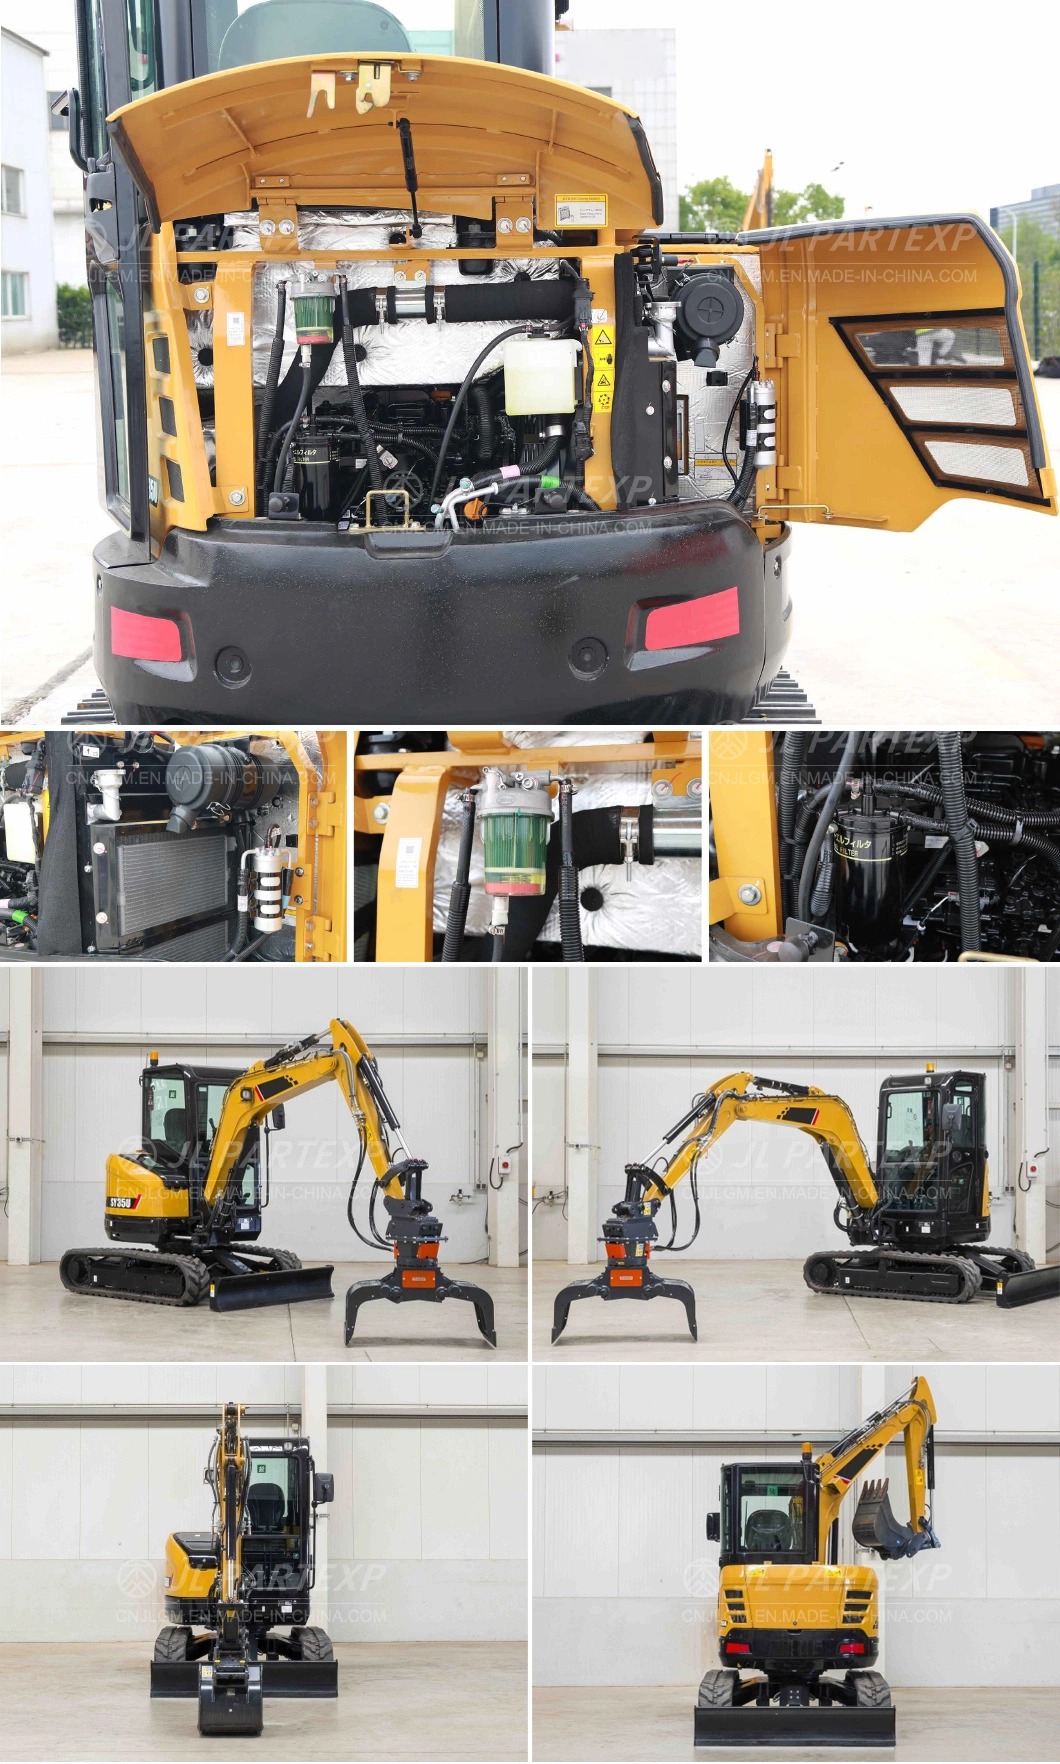 New Agricultural Machinery Farm Garden Orchard Home Hydraulic Medium Mini Small Compact Enclosed Closed Cabin Black Yellow Portable Excavator Digger Trade